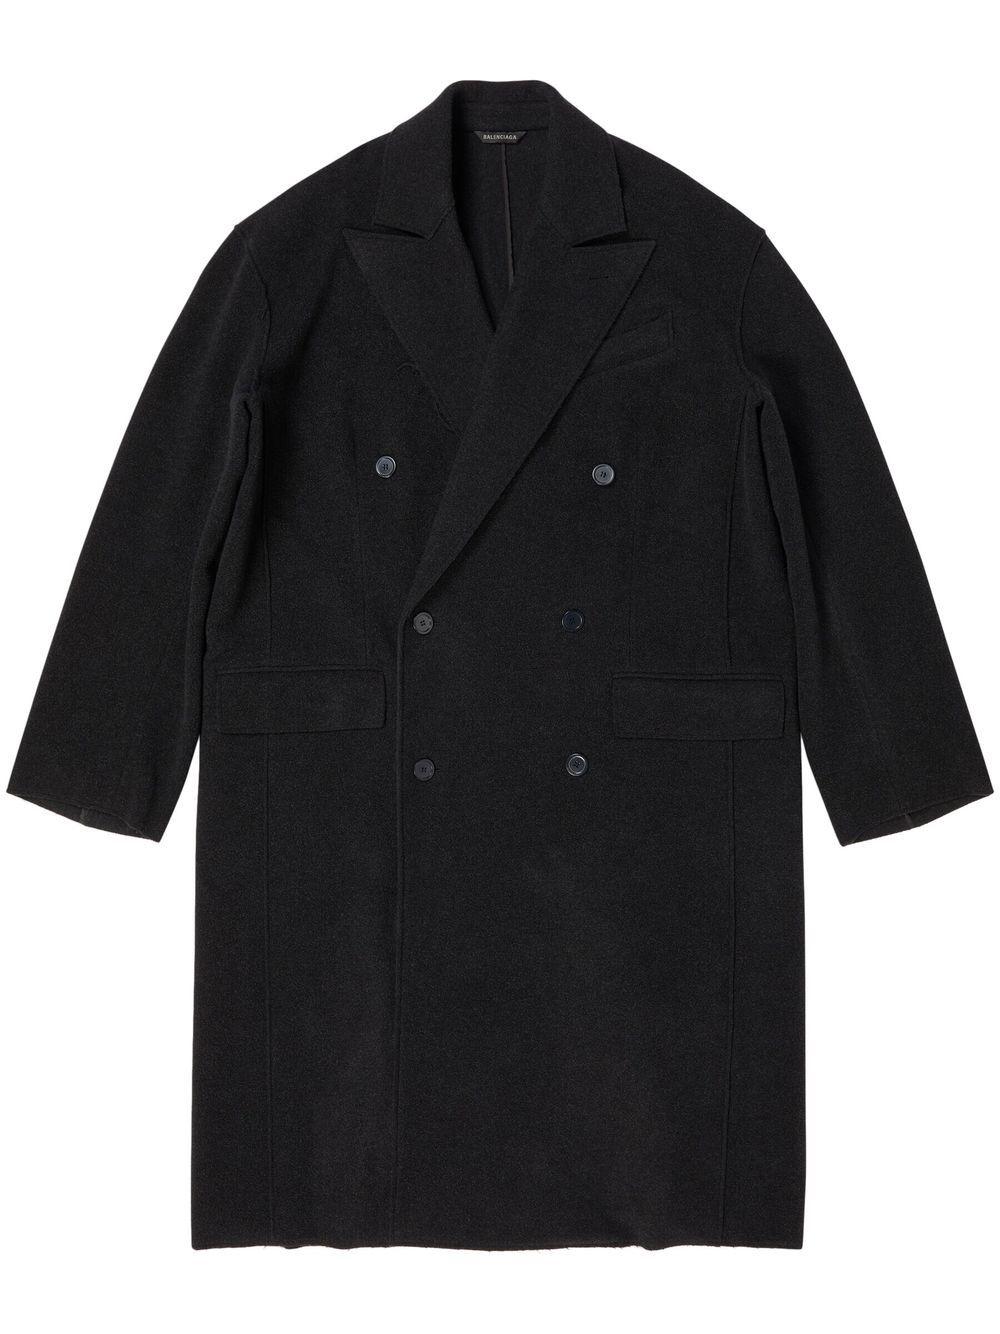 Balenciaga Double-breasted Cashmere Coat in Black | Lyst